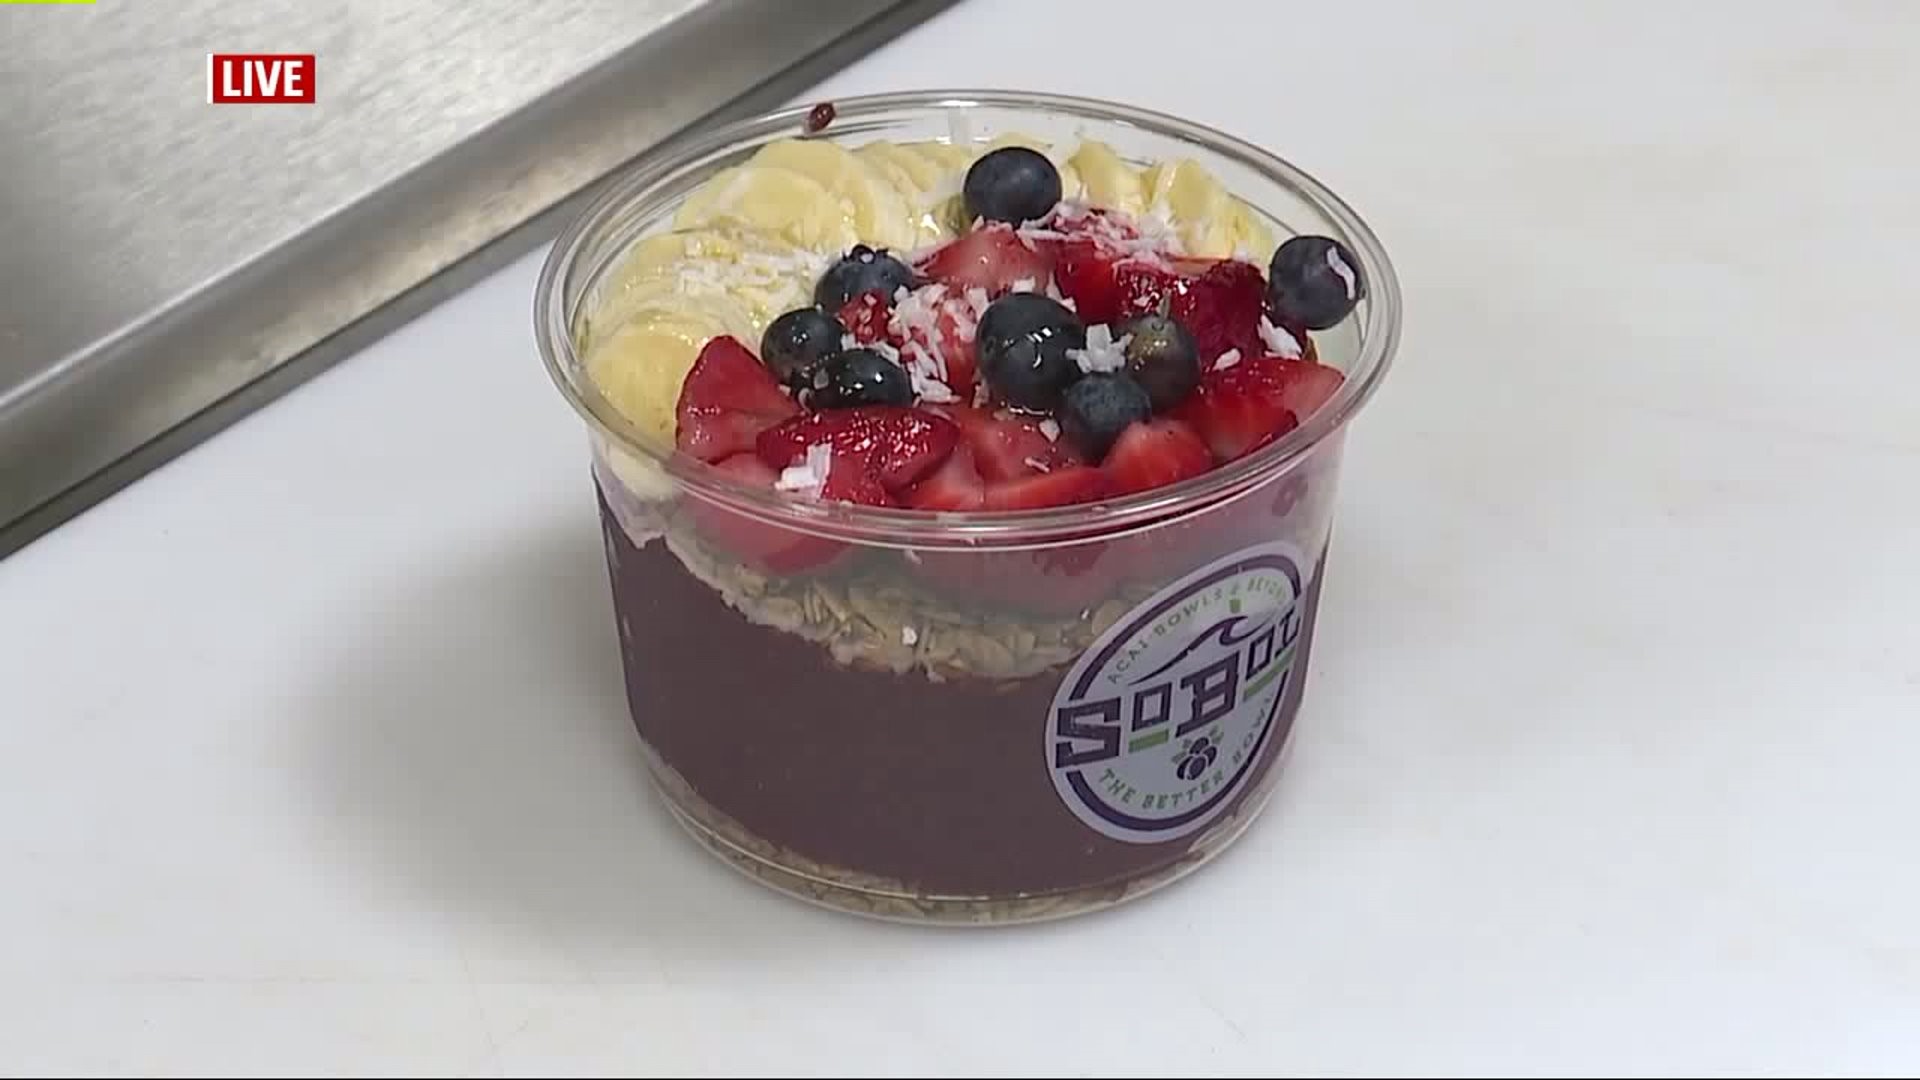 SoBol opens in Lancaster County, offering Acai Bowls and more